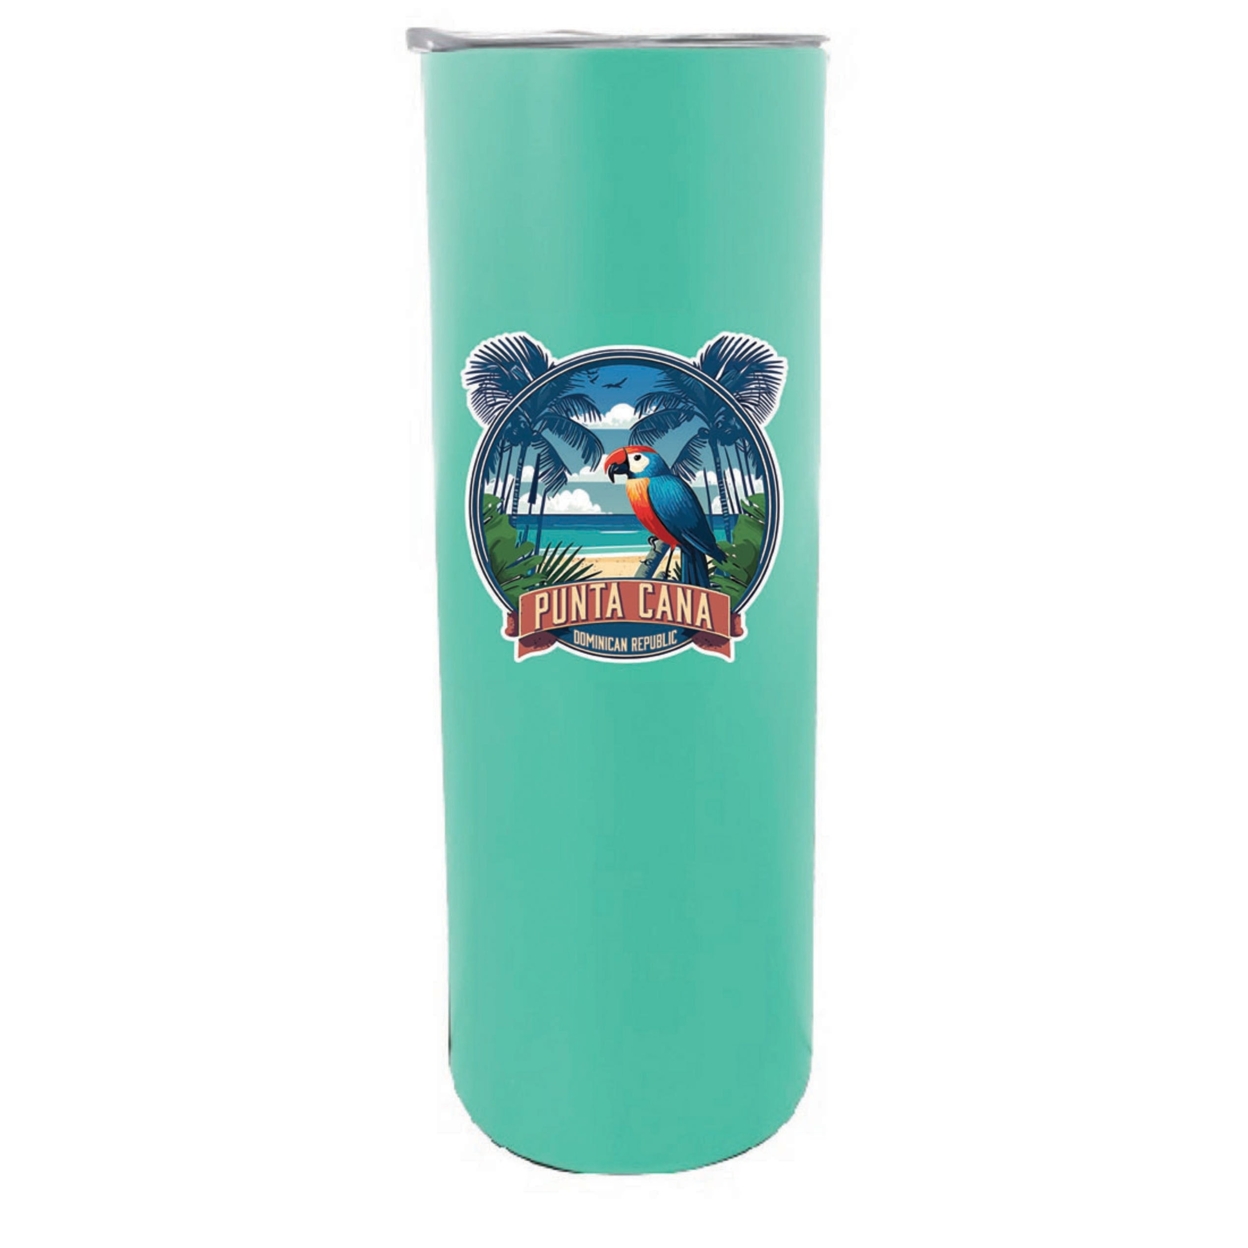 Punta Cana Dominican Republic Souvenir 20 Oz Insulated Stainless Steel Skinny Tumbler - Seafoam, PARROT B